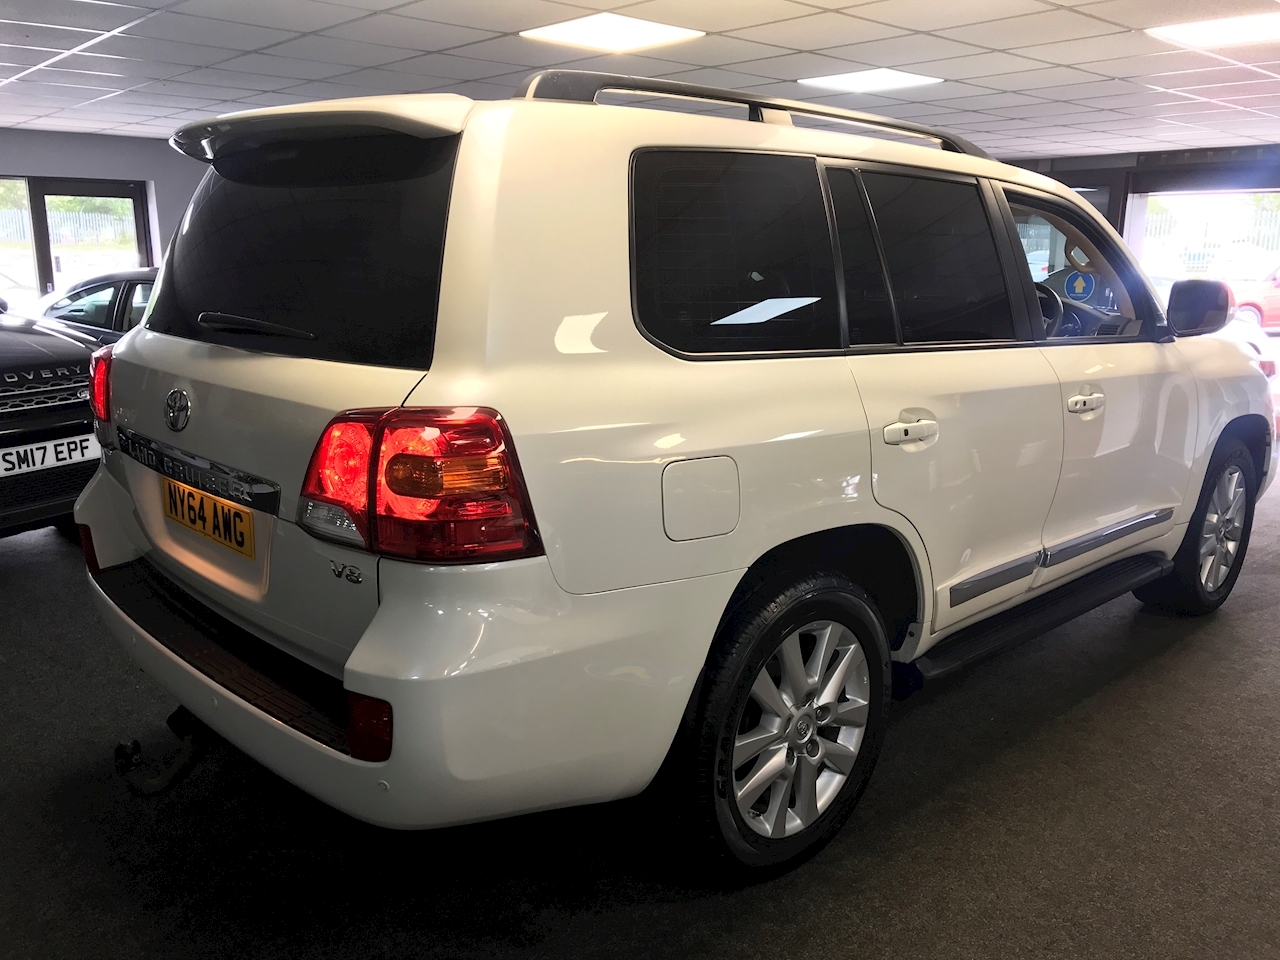 Land Cruiser 4.5 D-4D SUV 5dr Diesel Automatic 4x4 (TPMS) (250 g/km, 272 bhp) 4.5 5dr SUV Automatic Diesel